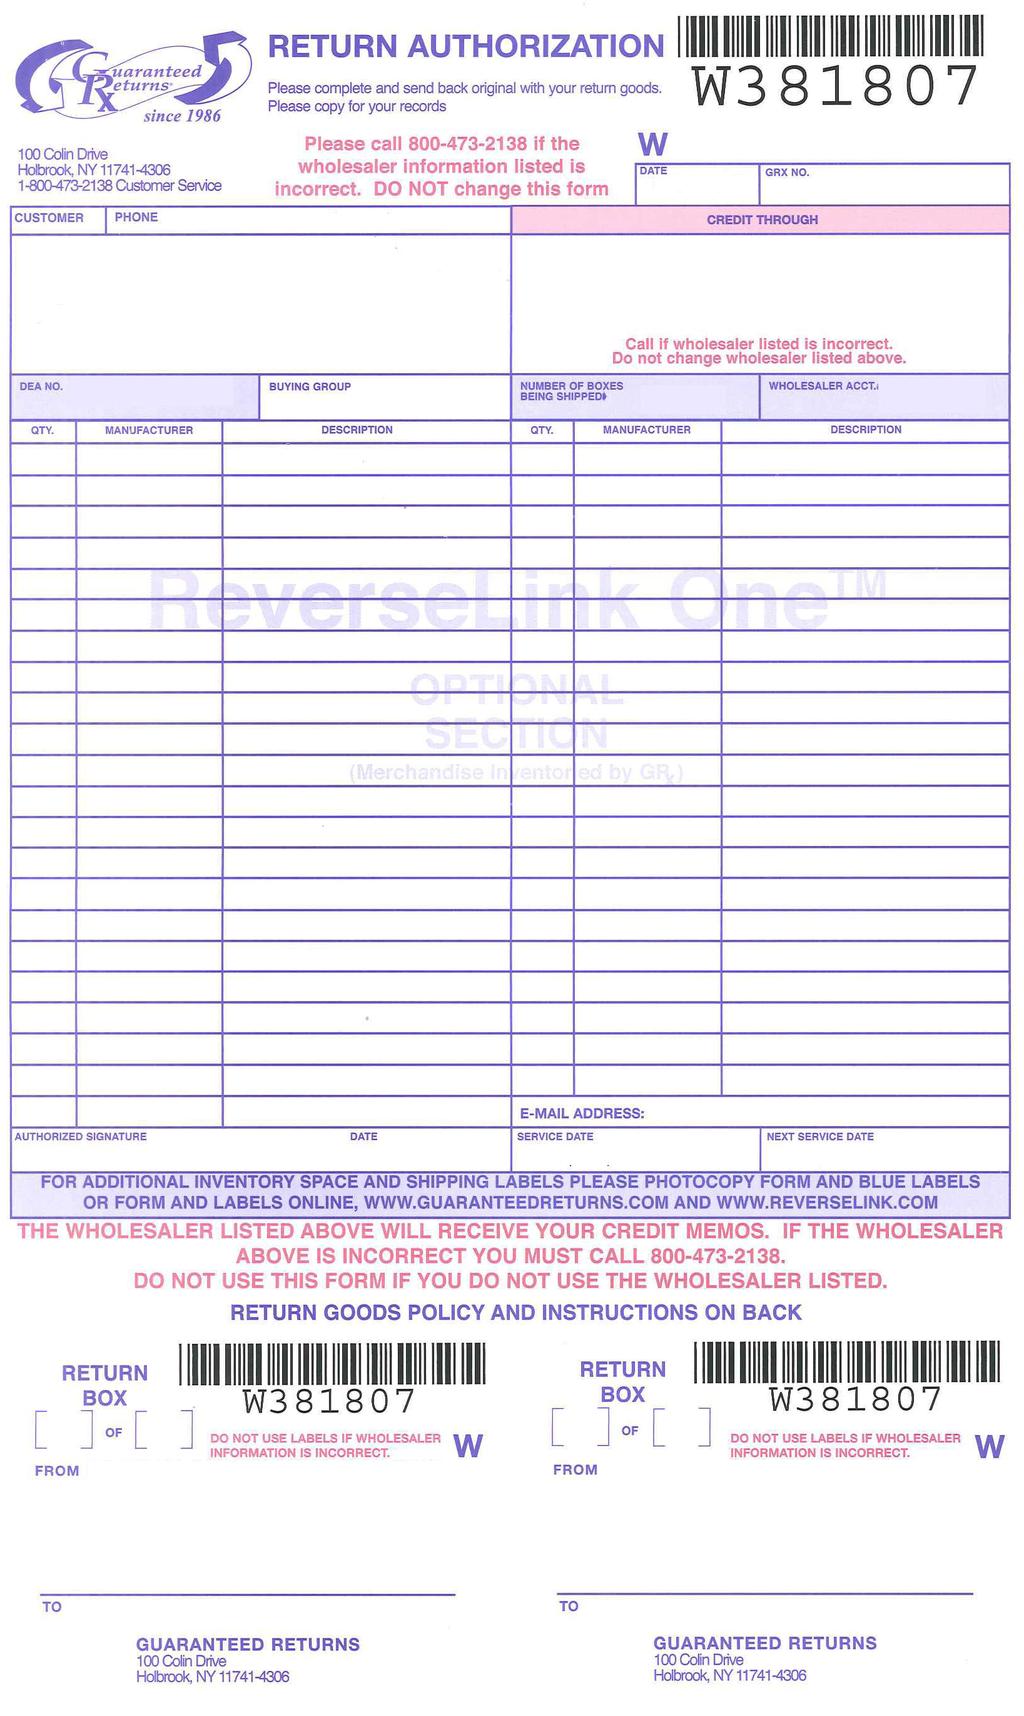 HELPFUL HINTS FOR SHIPPING & PACKING 1. Locate your Return Authorization form with address labels (Attached to the bottom of the Return Authorization Form).